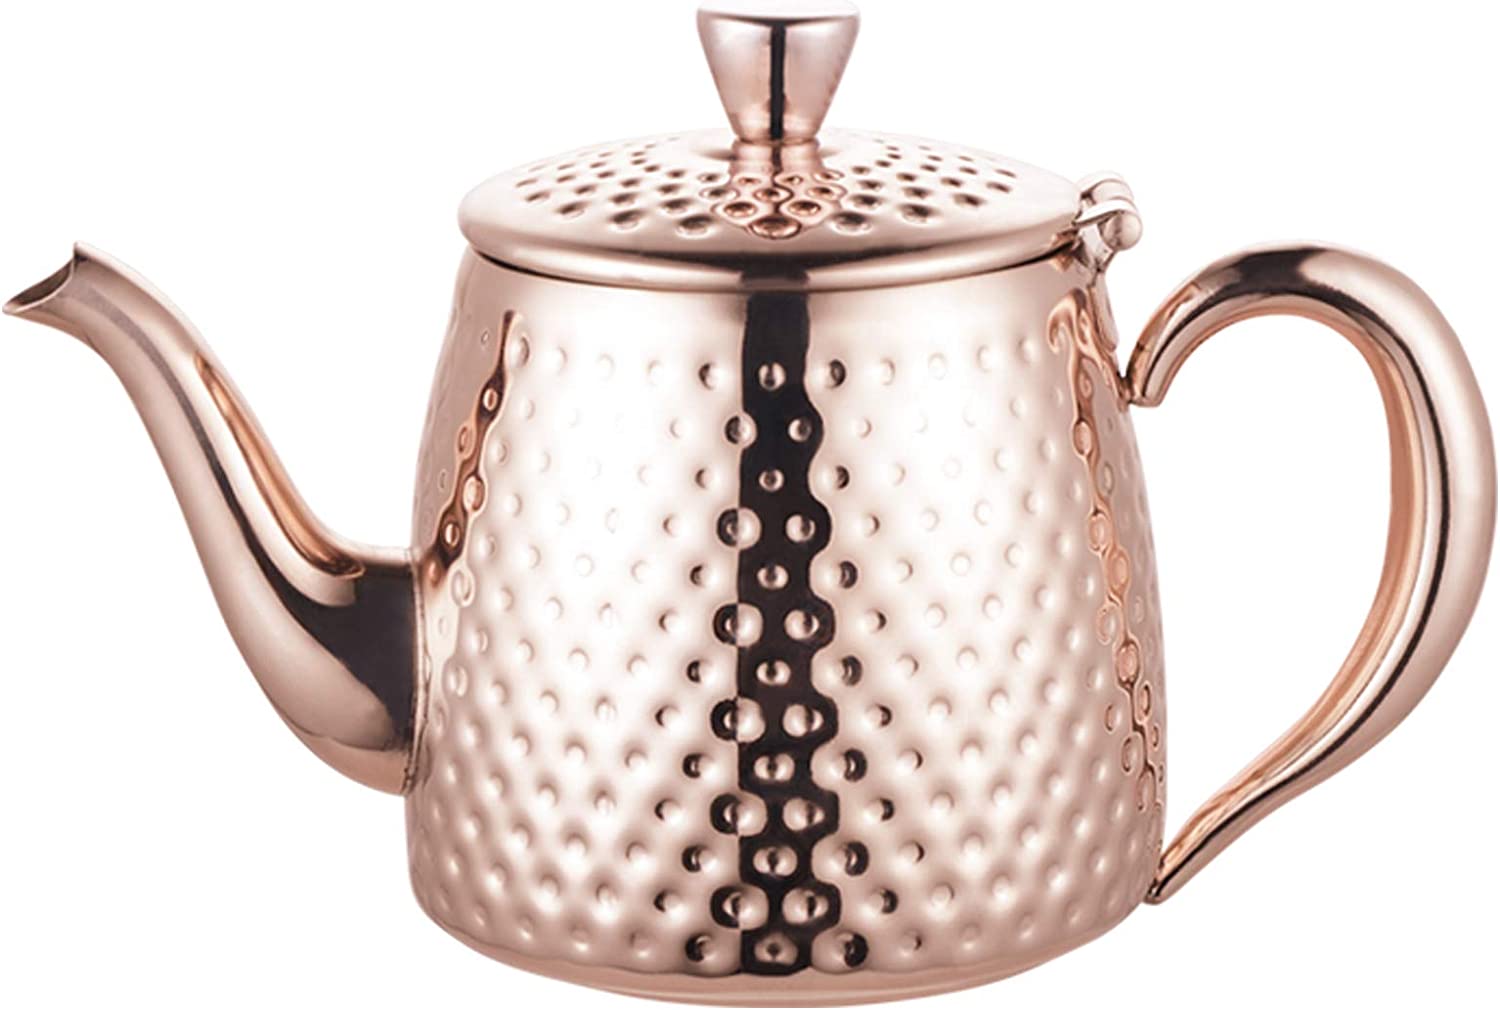 Cafe Ole Café Olé Sandringham Hammered Effect Teapot Made from High Quality 18/10 Stainless Steel and Copper Finish - 18oz, 0.5L, Drip-Free Casting, Hollow Handles